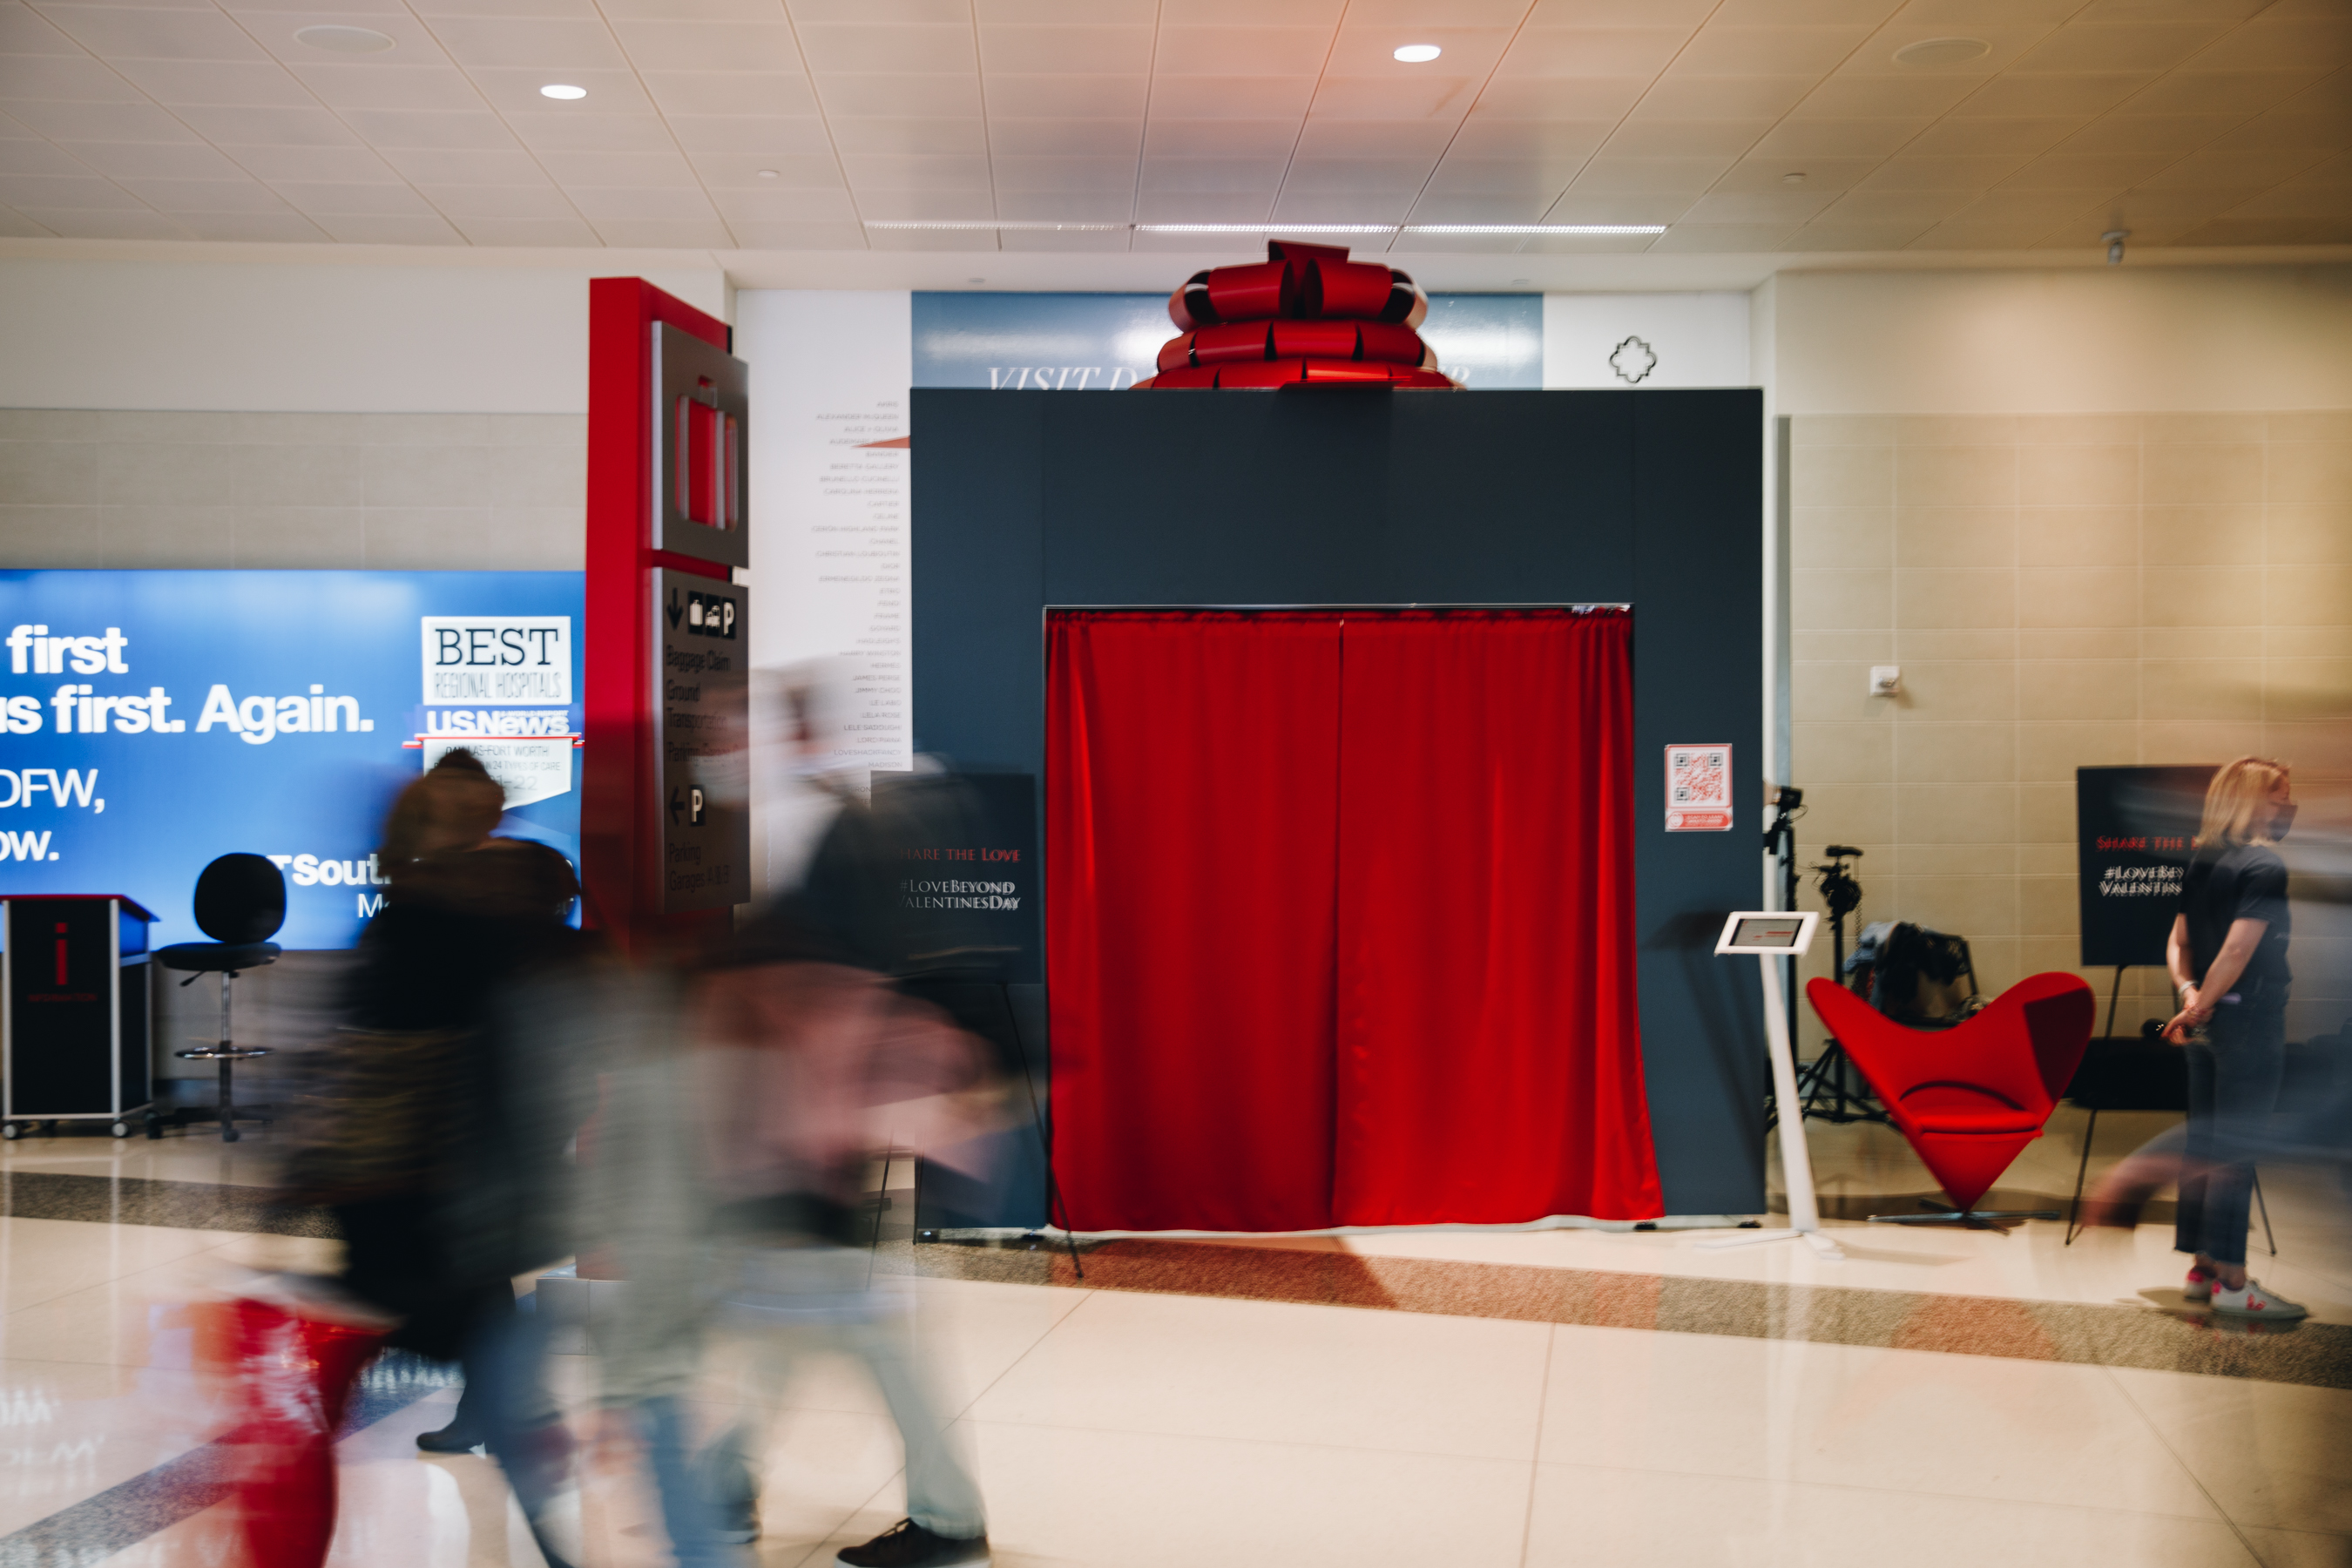 Love Beyond launches on Valentine's Day with activations in Rockefeller Center in New York City, Dallas Love Field Airport, Mall of America in Minneapolis, and Alderwood Mall in Seattle.